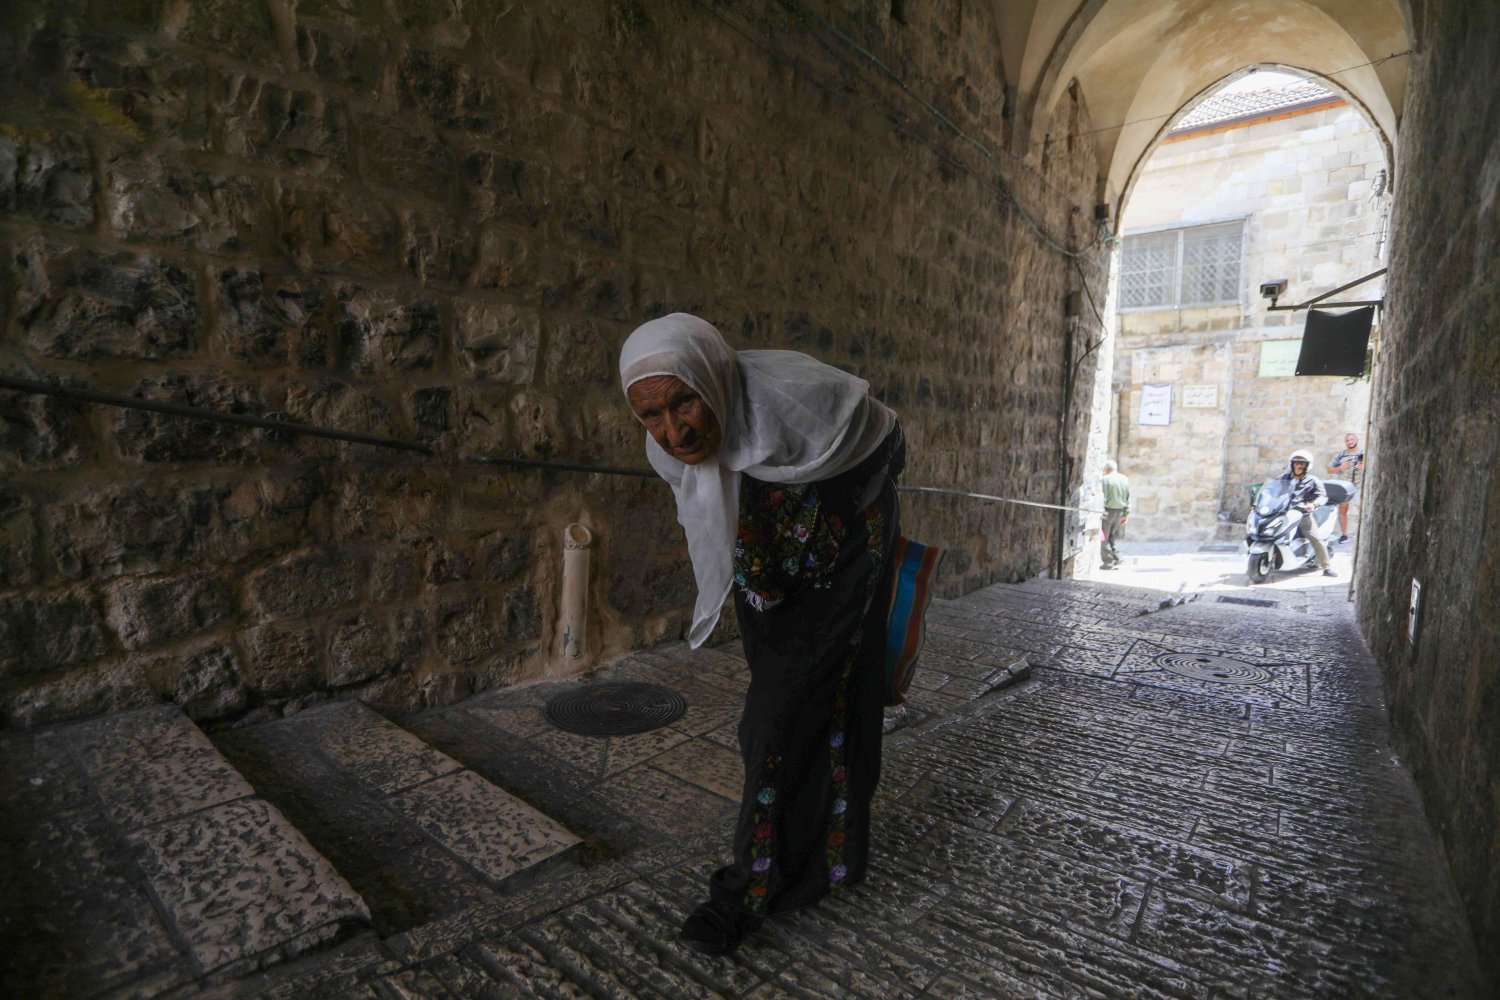 An elderly woman in a tunnel in the Old City of Jerusalem, 2021